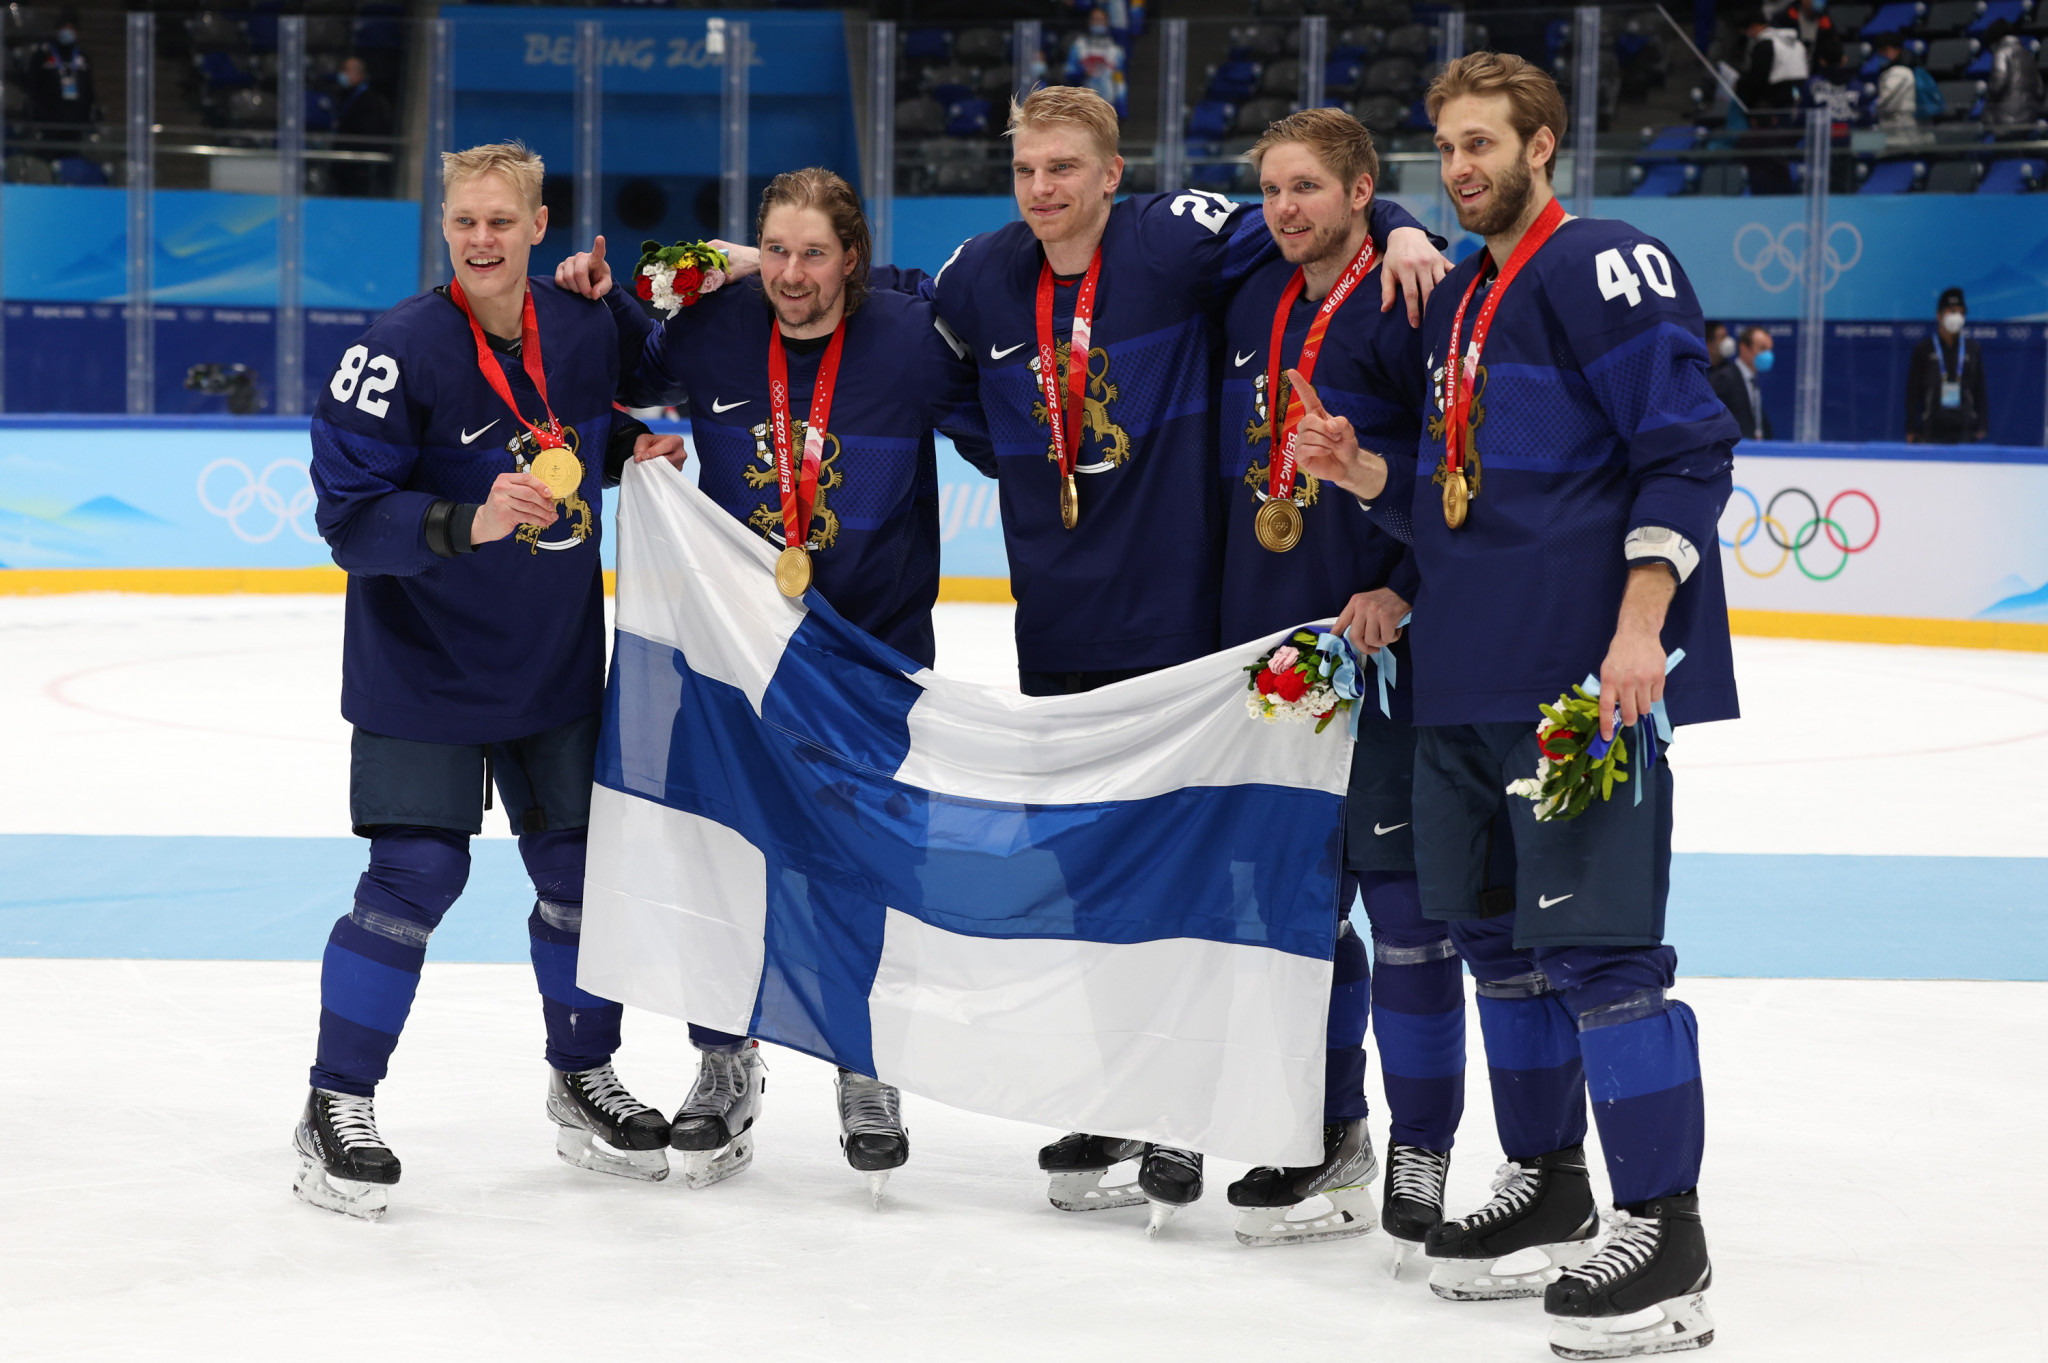 Finland will hope to add another world title to their Olympic crown ©Getty Images